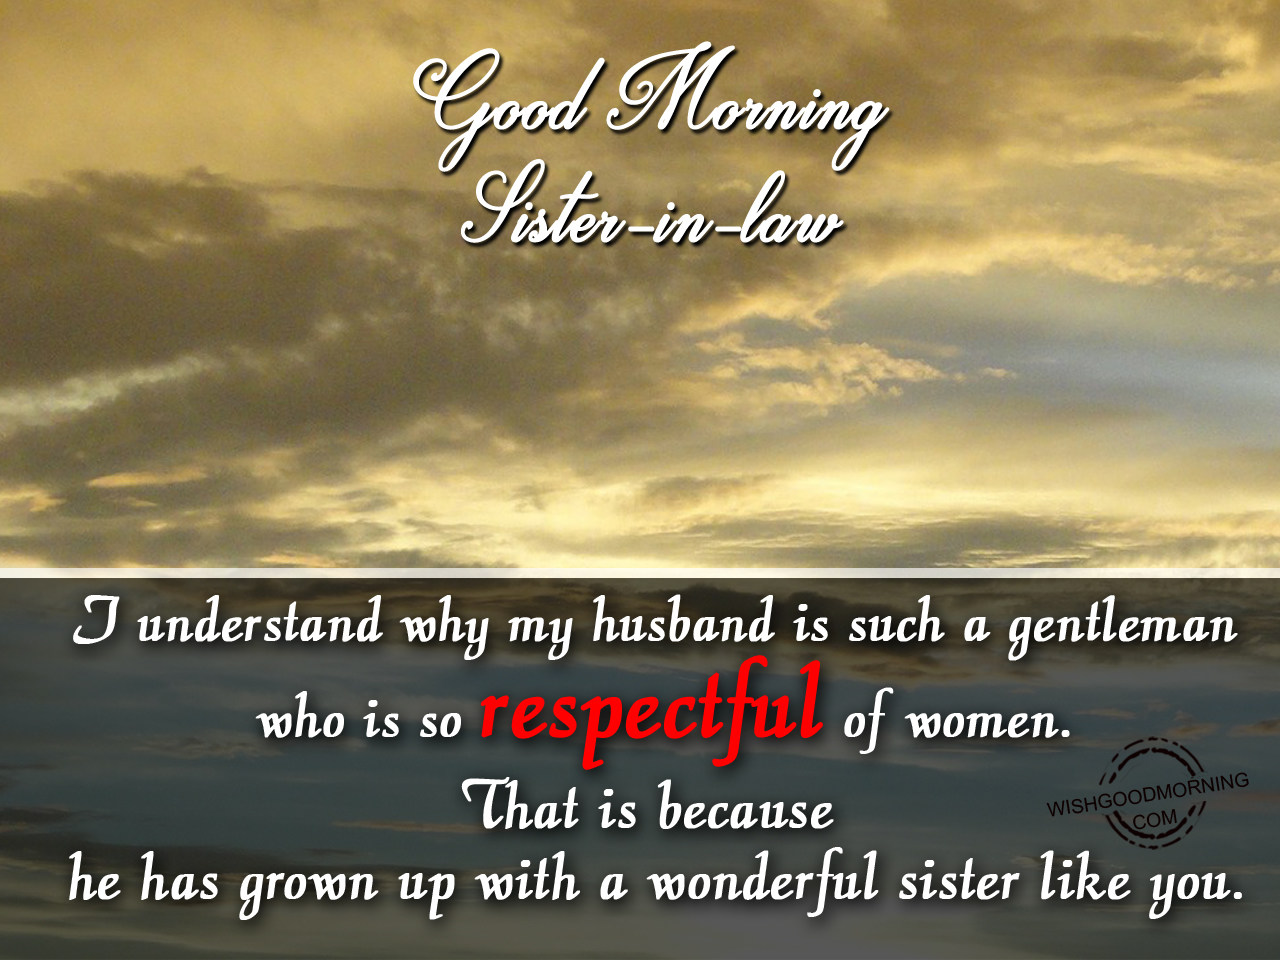 Wonderful sister-in-law - Good Morning Pictures – WishGoodMorning.com